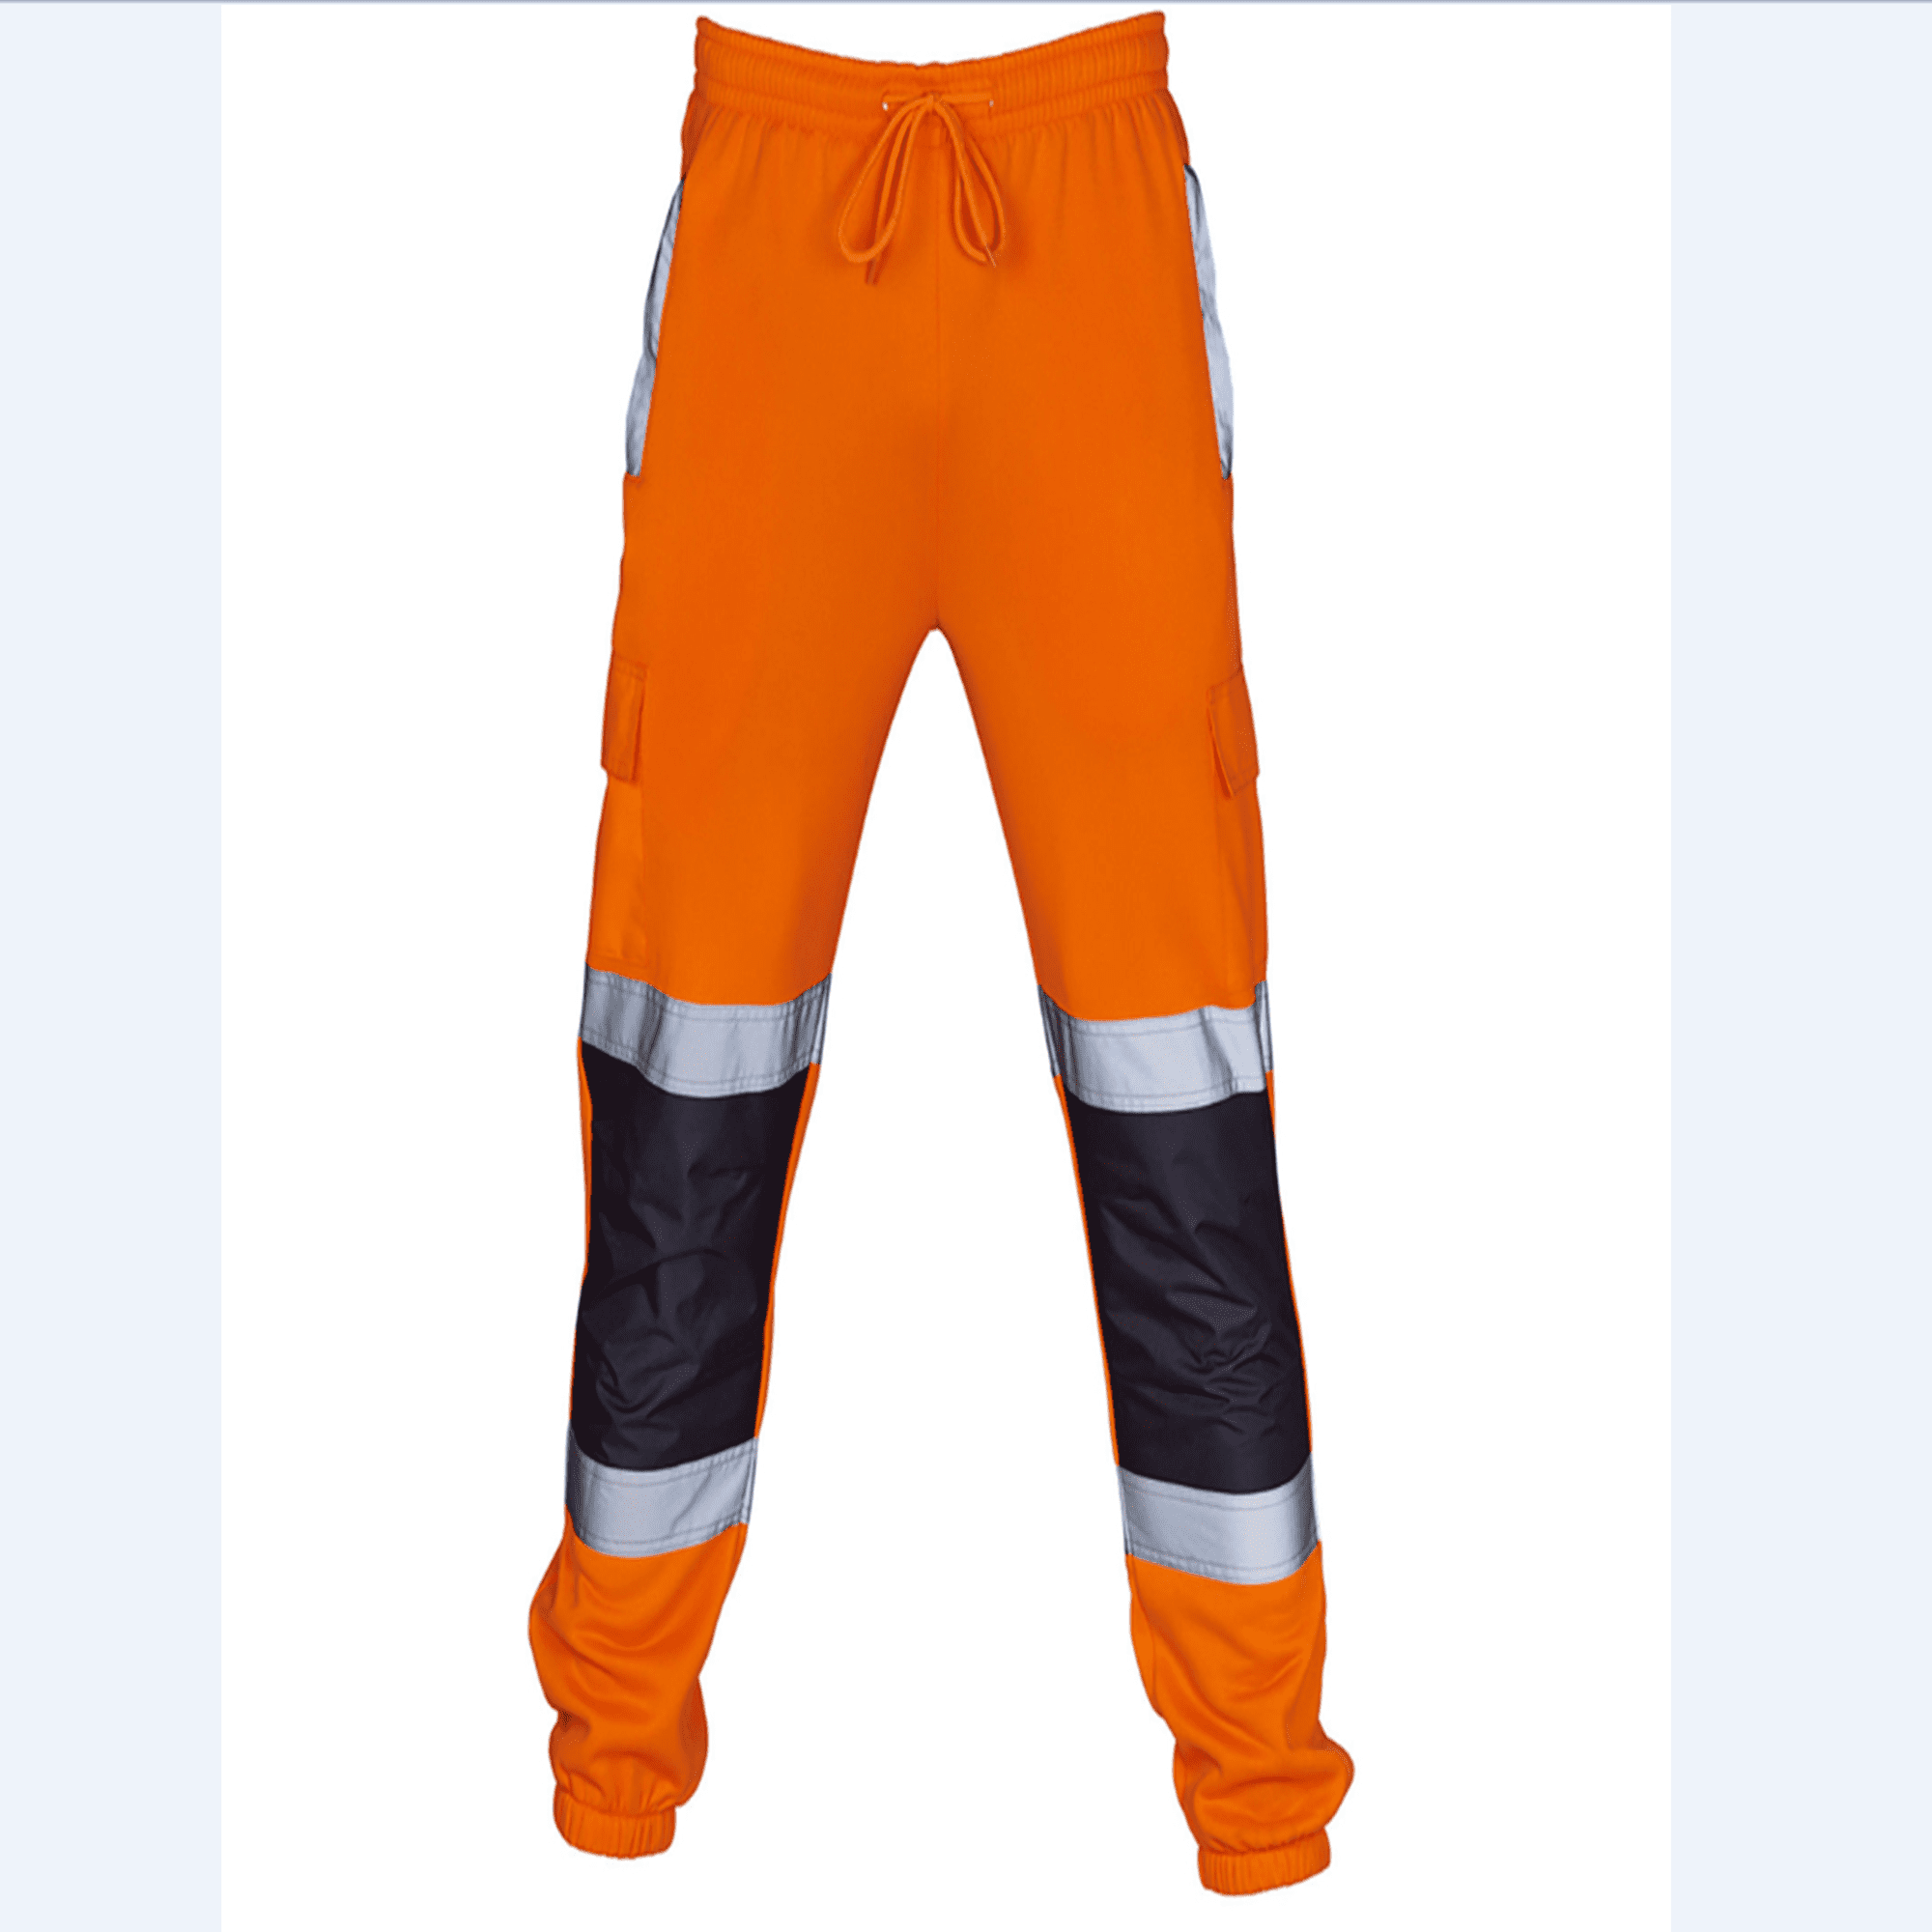 Supertouch Yellow Hi High Vis Visibility Mens Polycotton Work Trousers Pants 